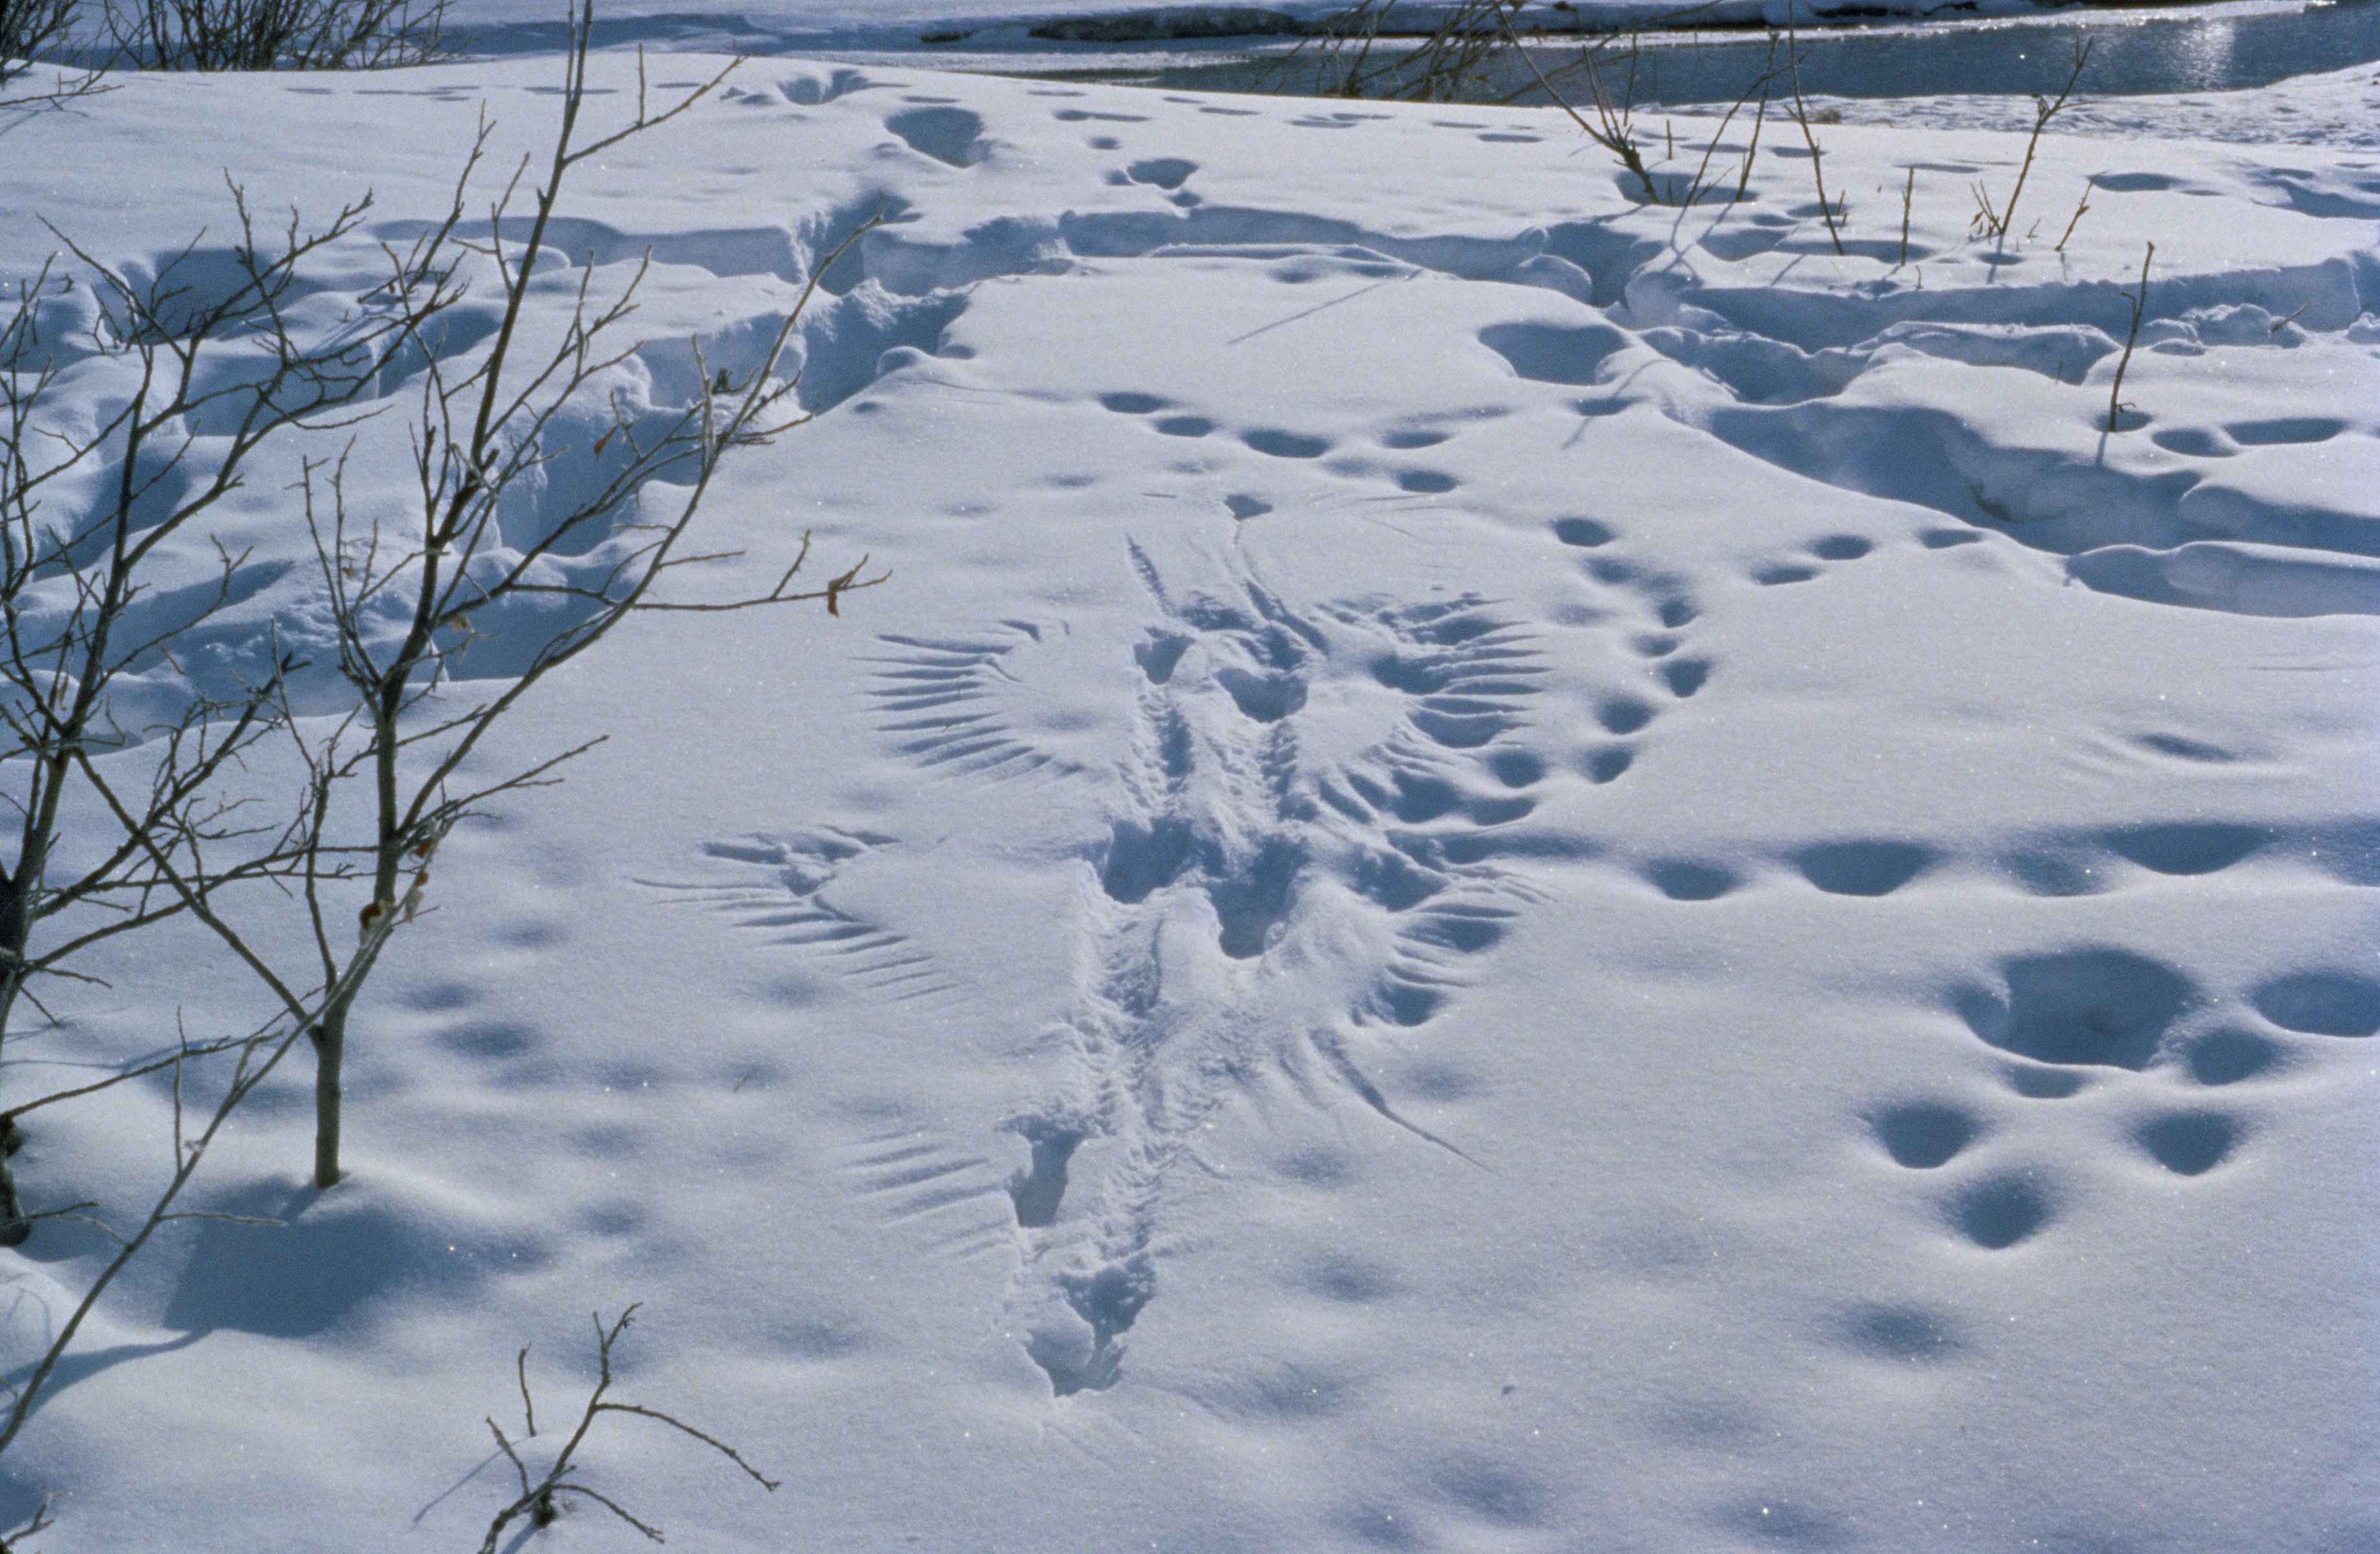 Quiz: Can You Guess the Animals That Made These Snow Tracks?